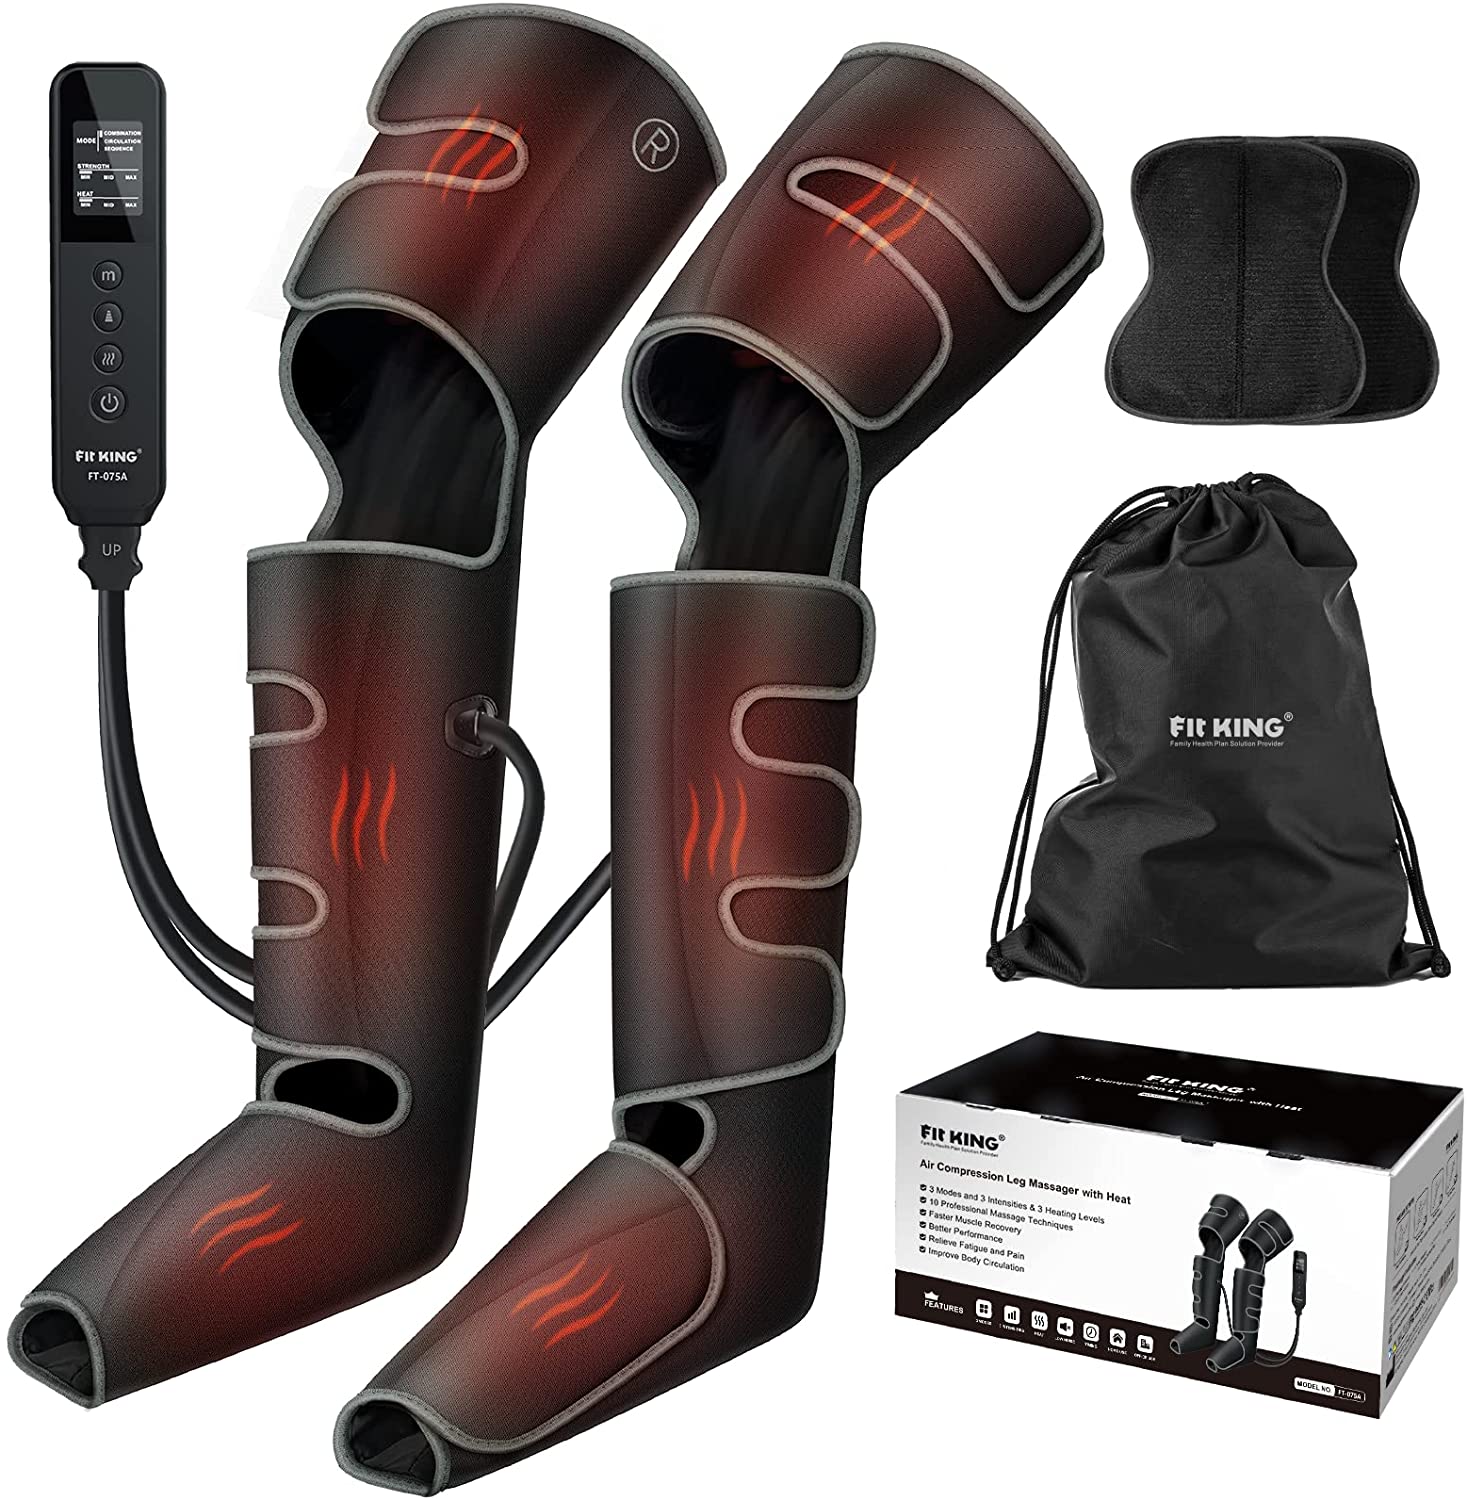 Full Leg Massager with Heat FT-075A-FIT KING